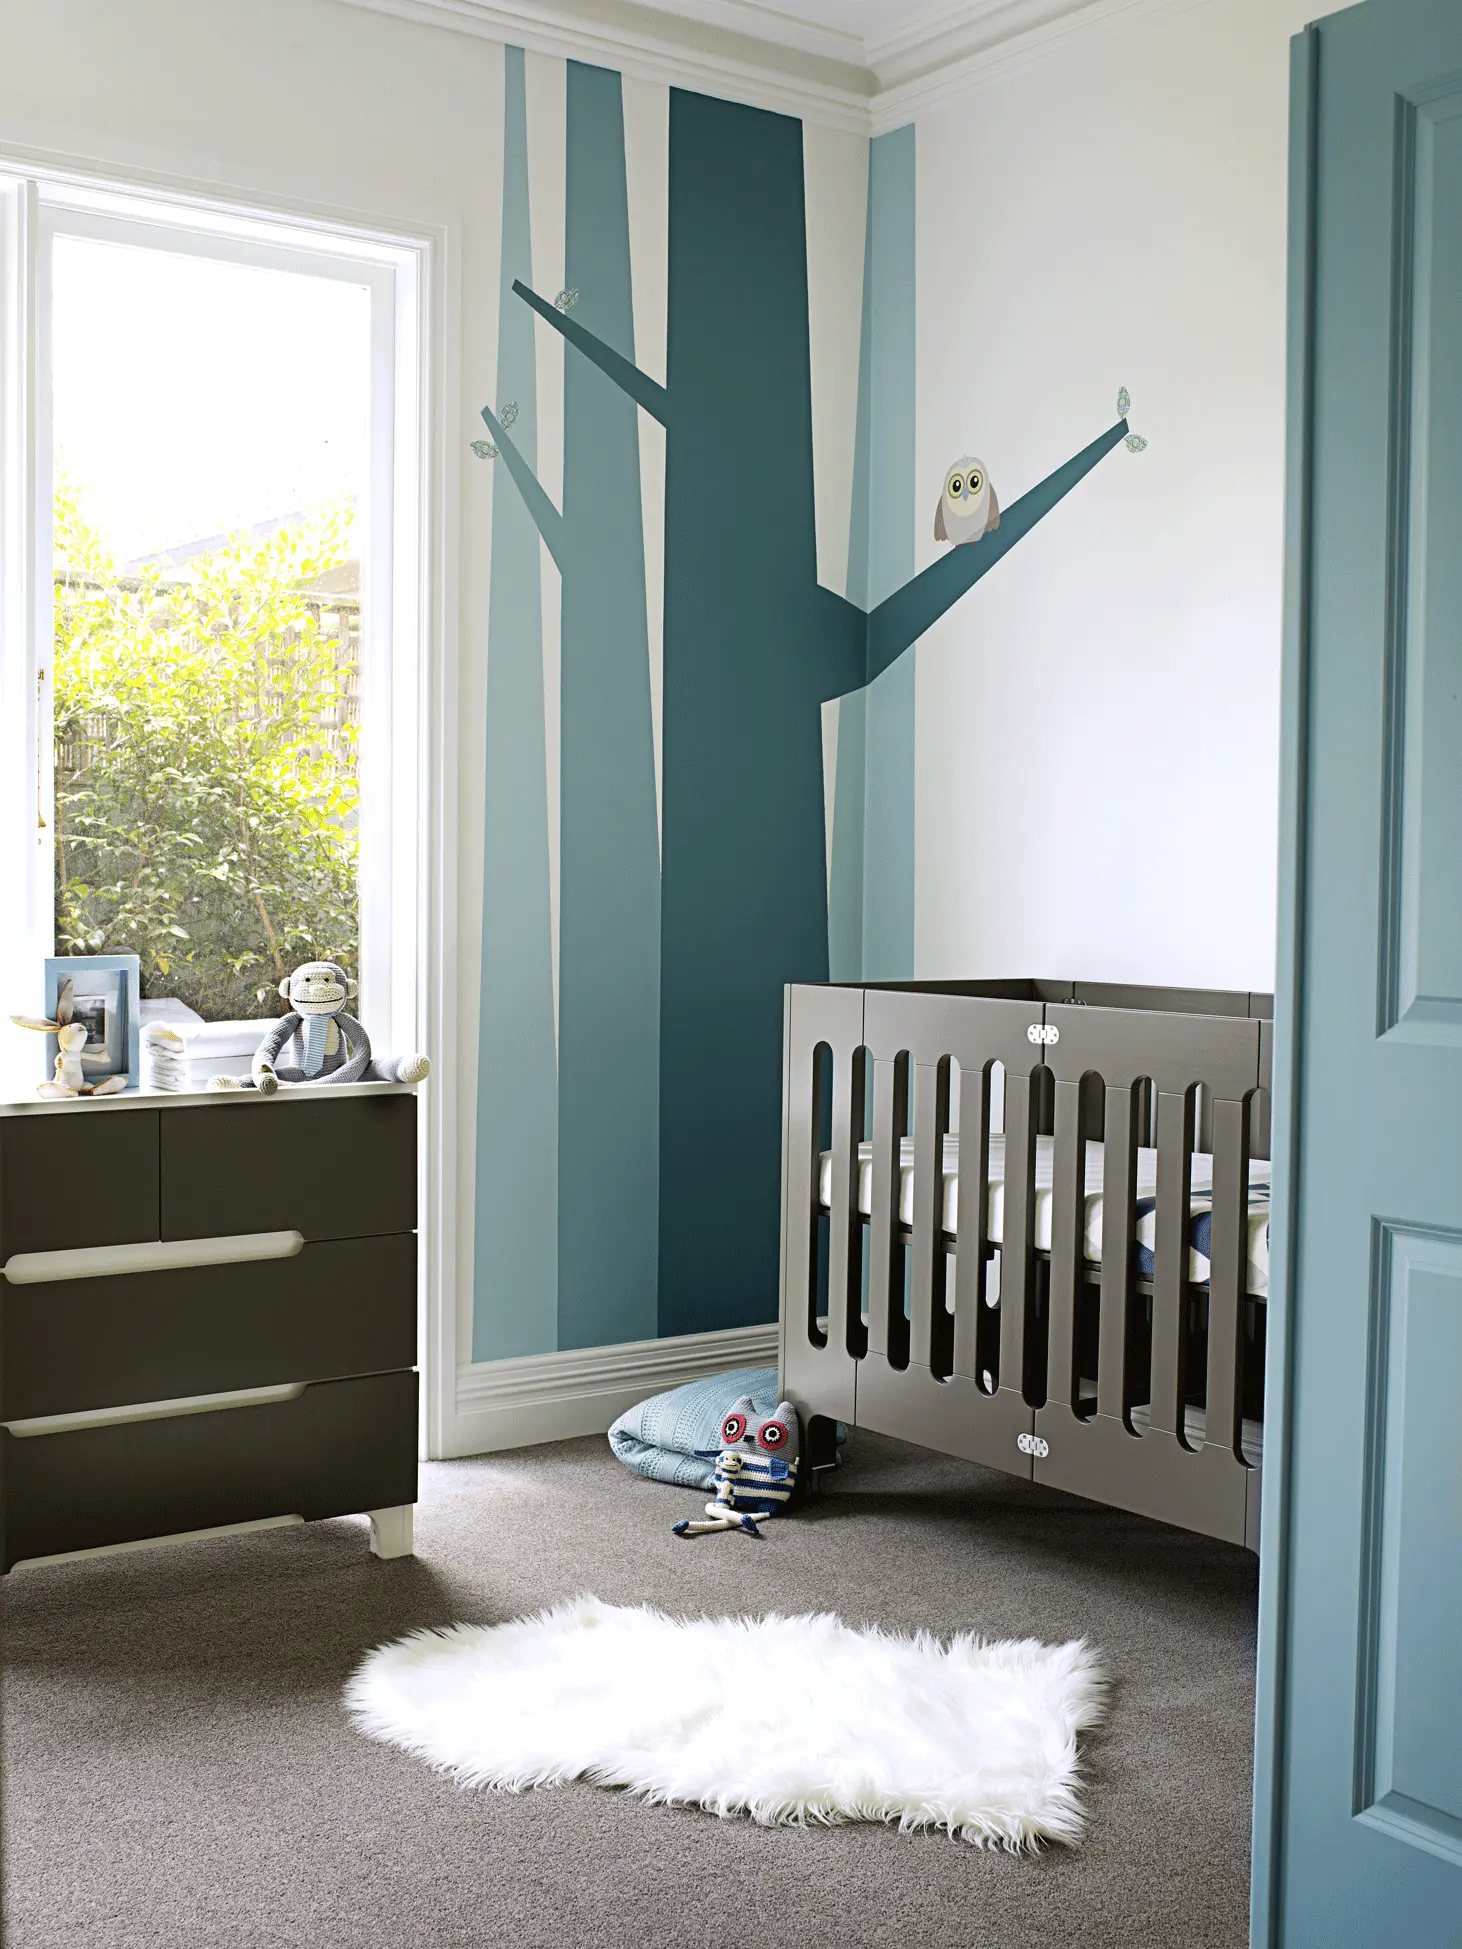 Blue and green monochromatic colour scheme for a nursery